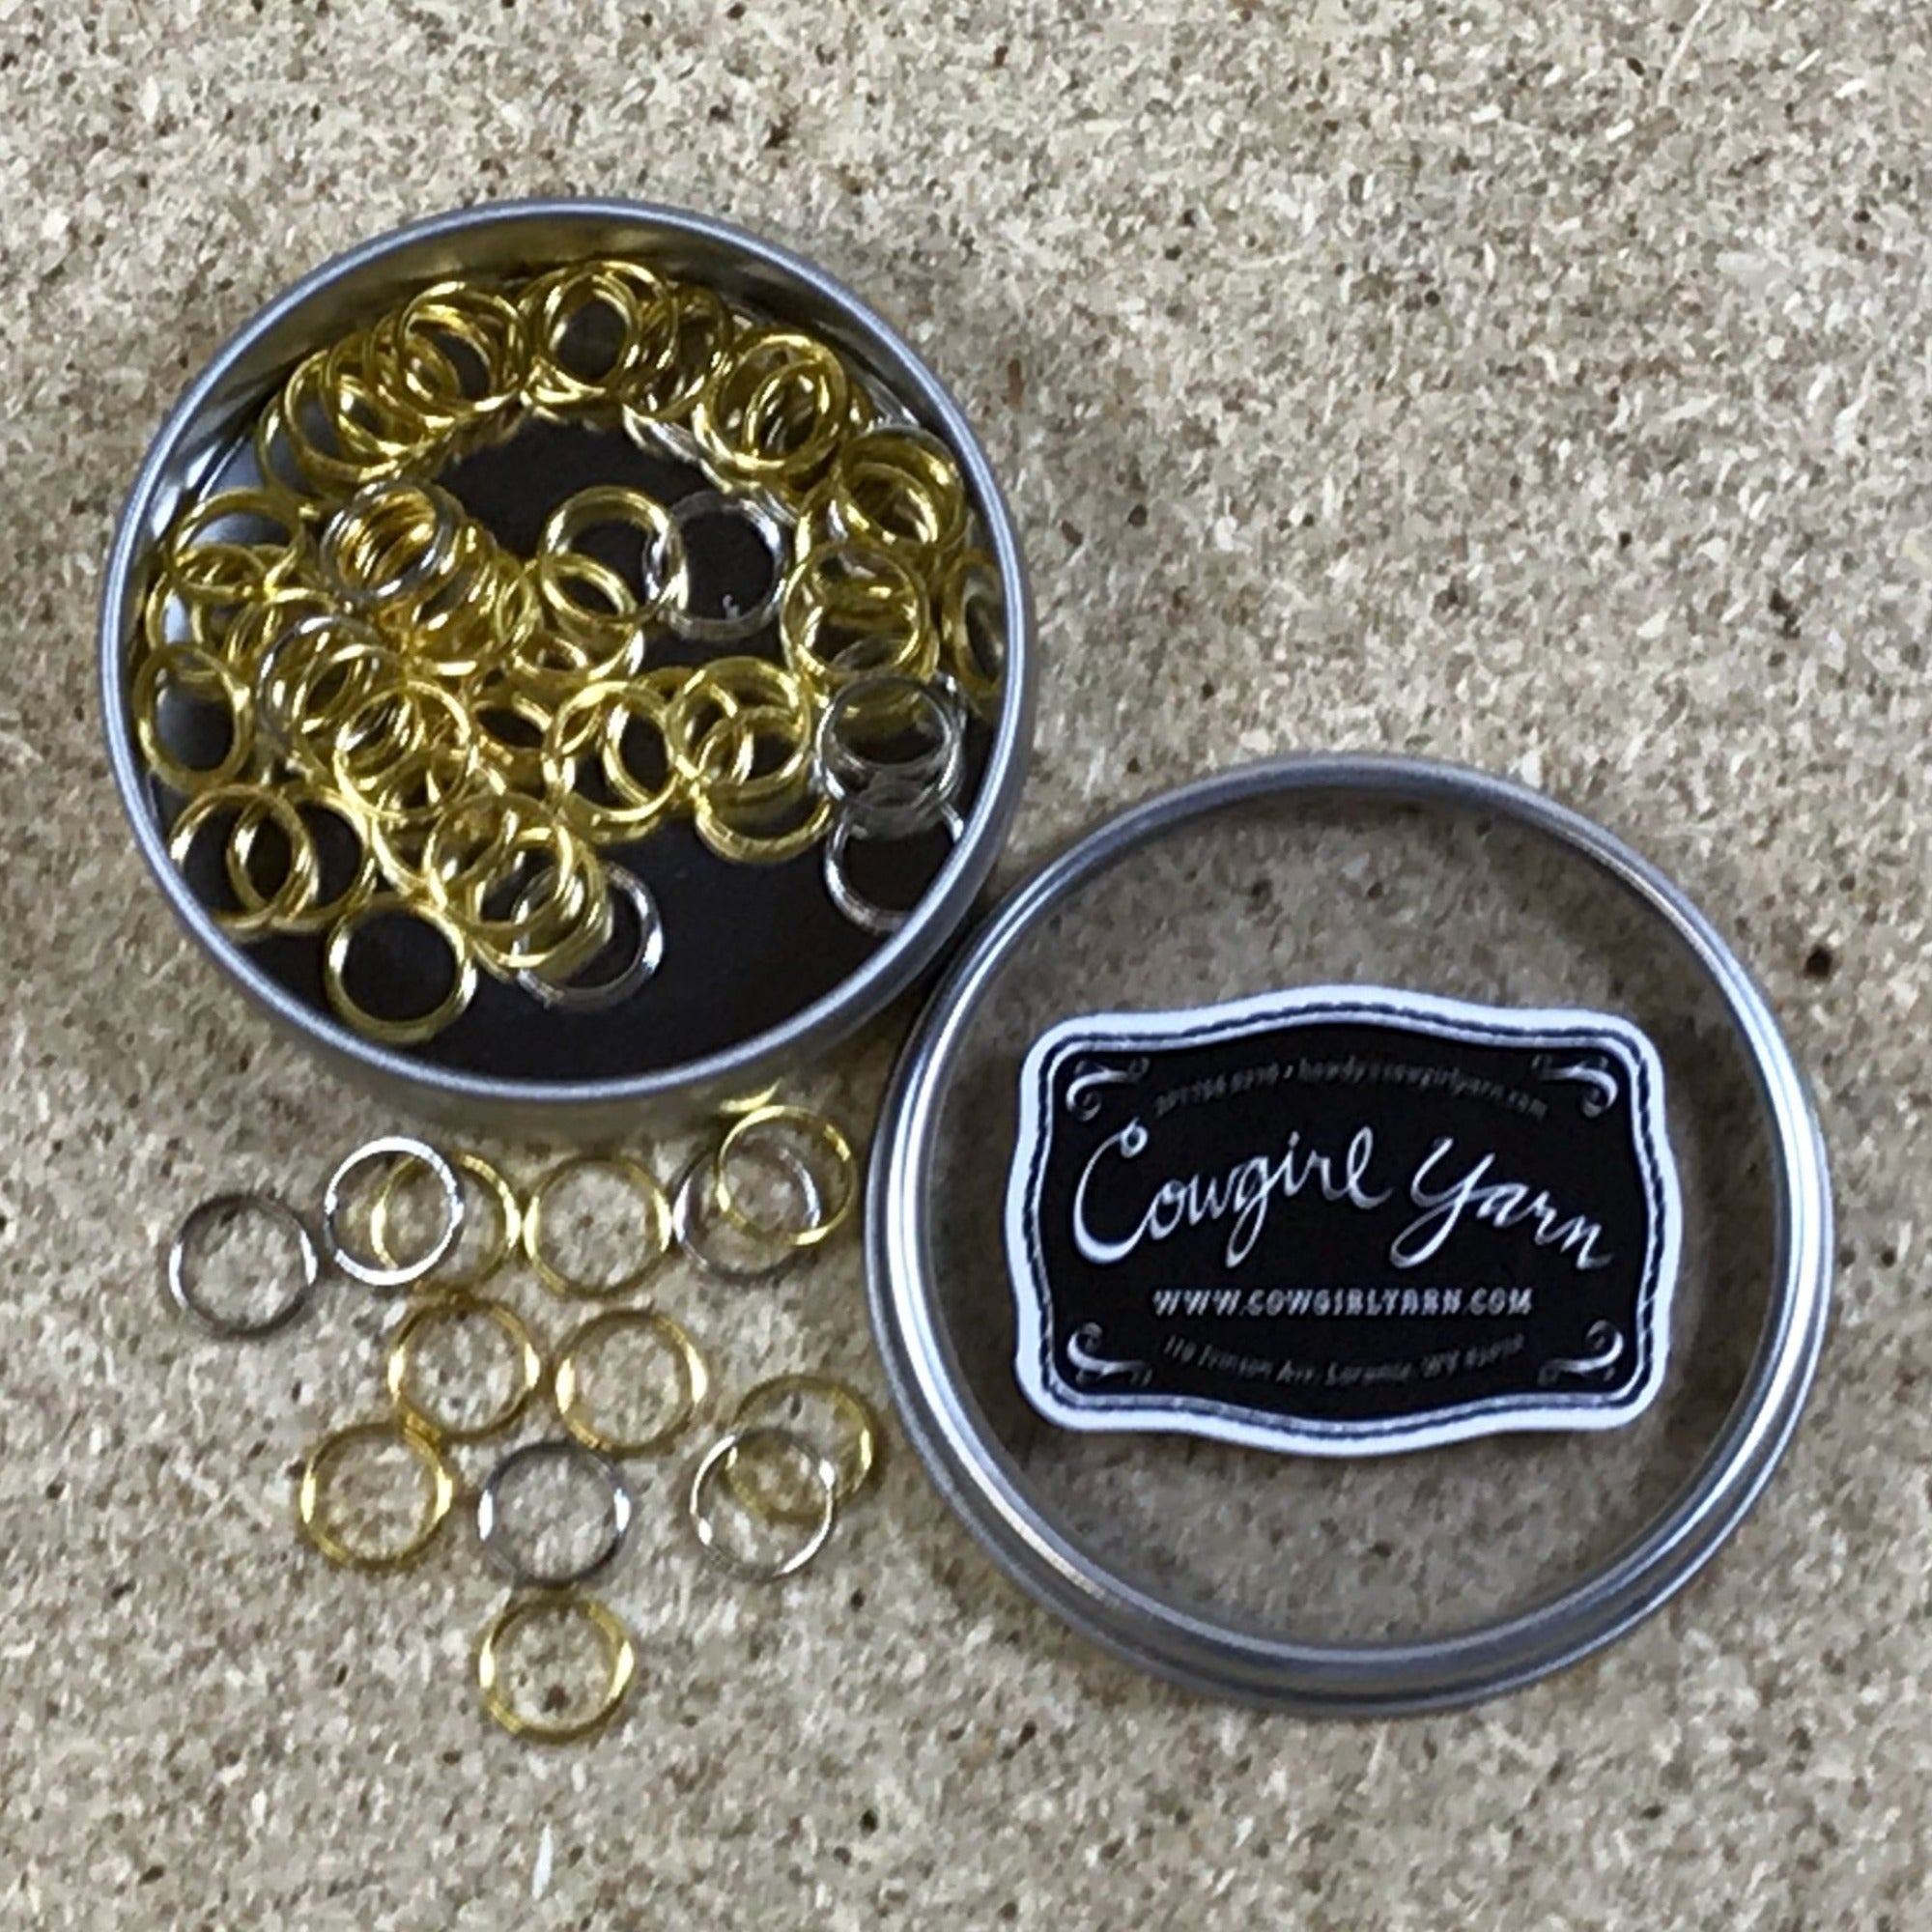 A Cowgirl Yarn branded metal tin filled with metal stitch markers in silver and bronze finishes